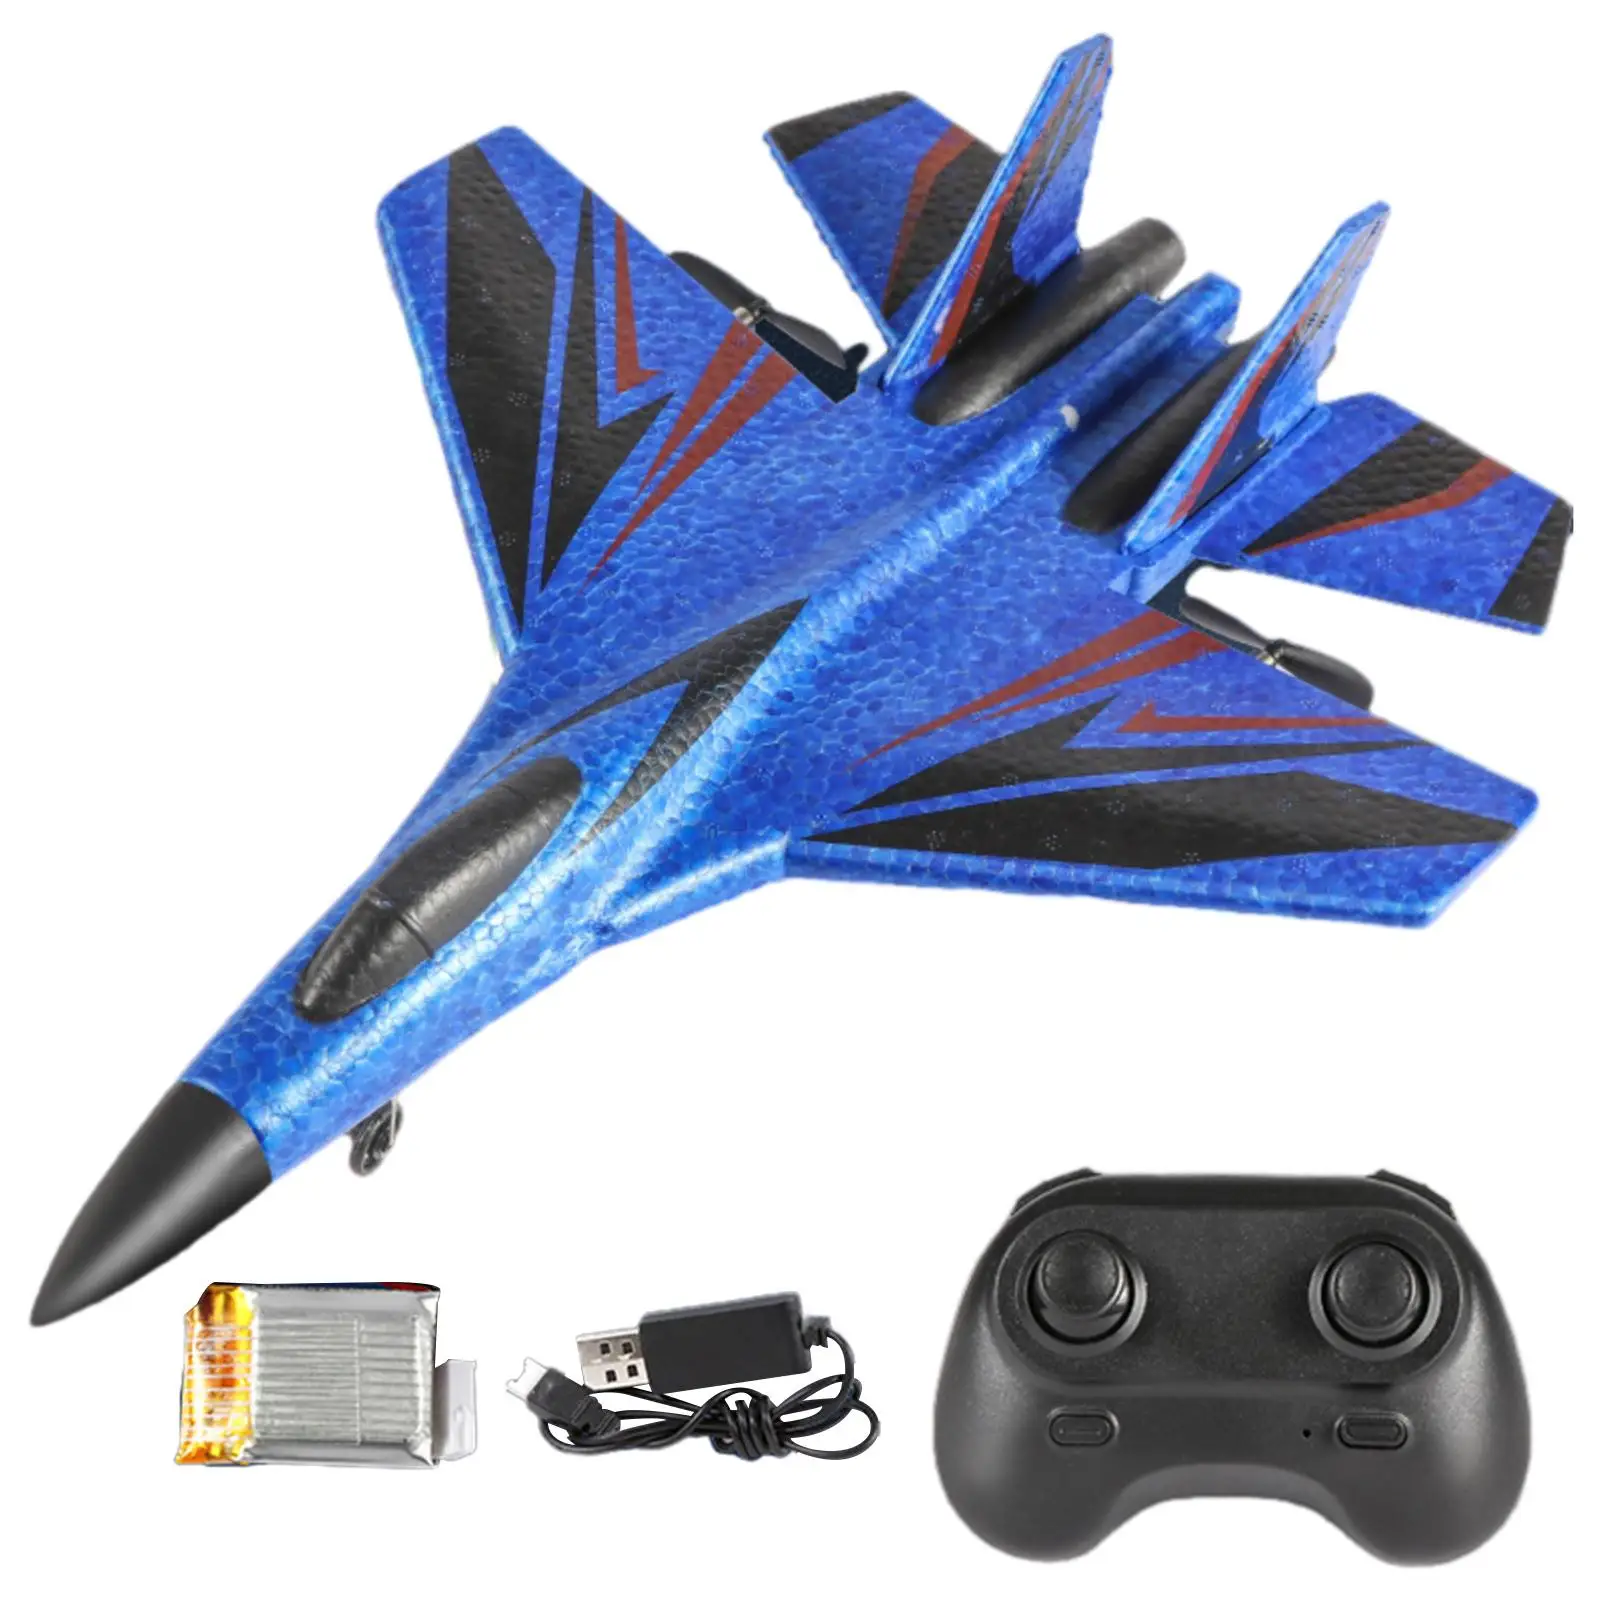 Remote Control Aircraft SU30 Aircraft Model Toys with Light Durable Jet Fighter Toys for Children Adults Beginner Birthday Gifts